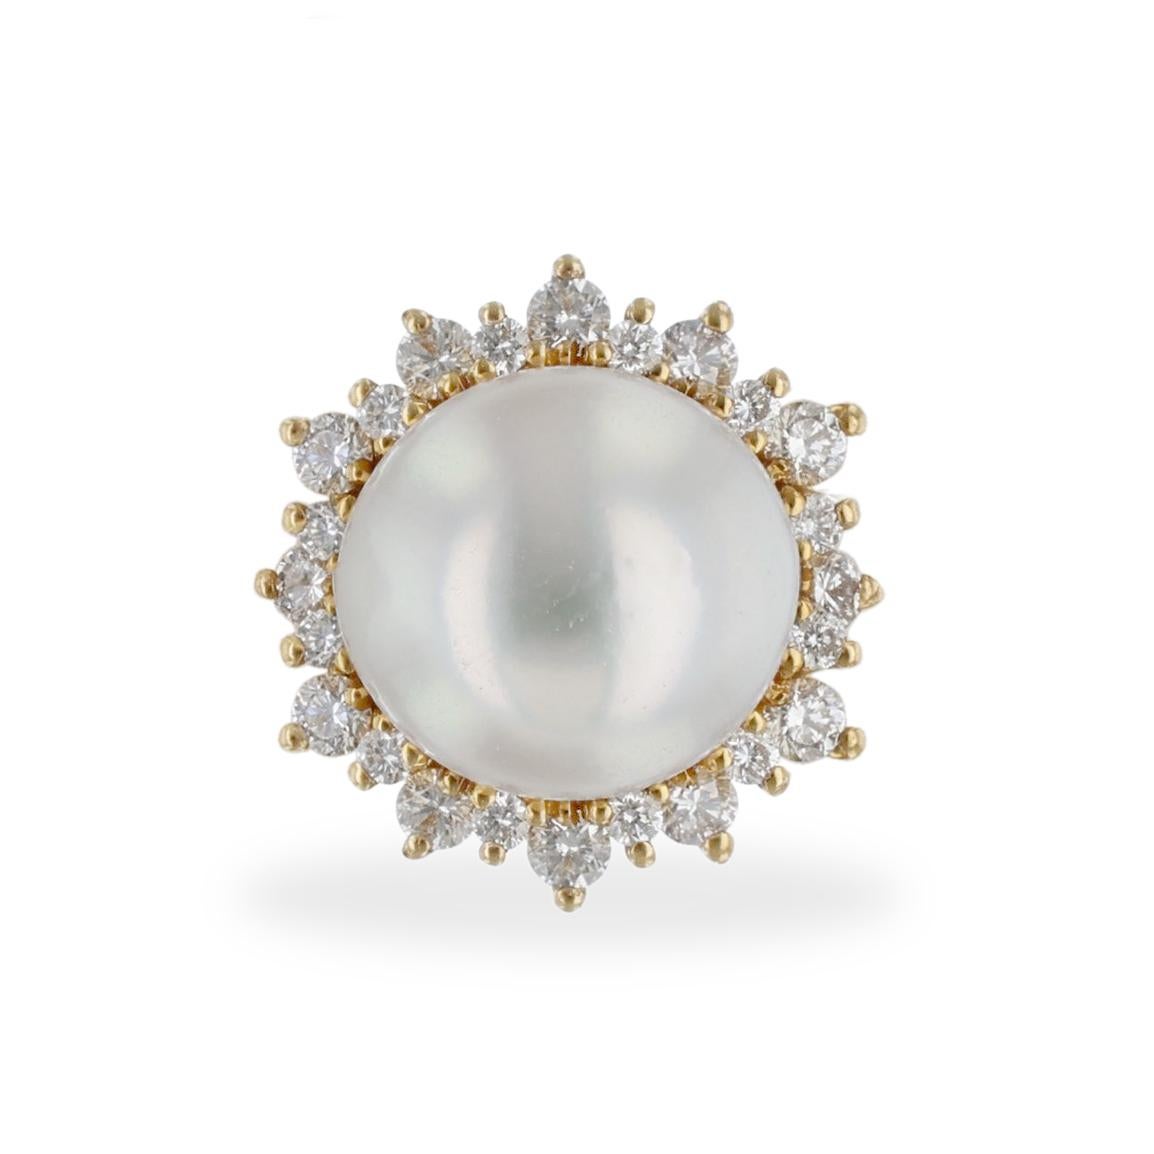 These stud earrings are made in 14K yellow gold and feature two 9 millimeter cultured pearls with 48 round cut diamonds weighing 0.61 carats combined. Post Backing.

